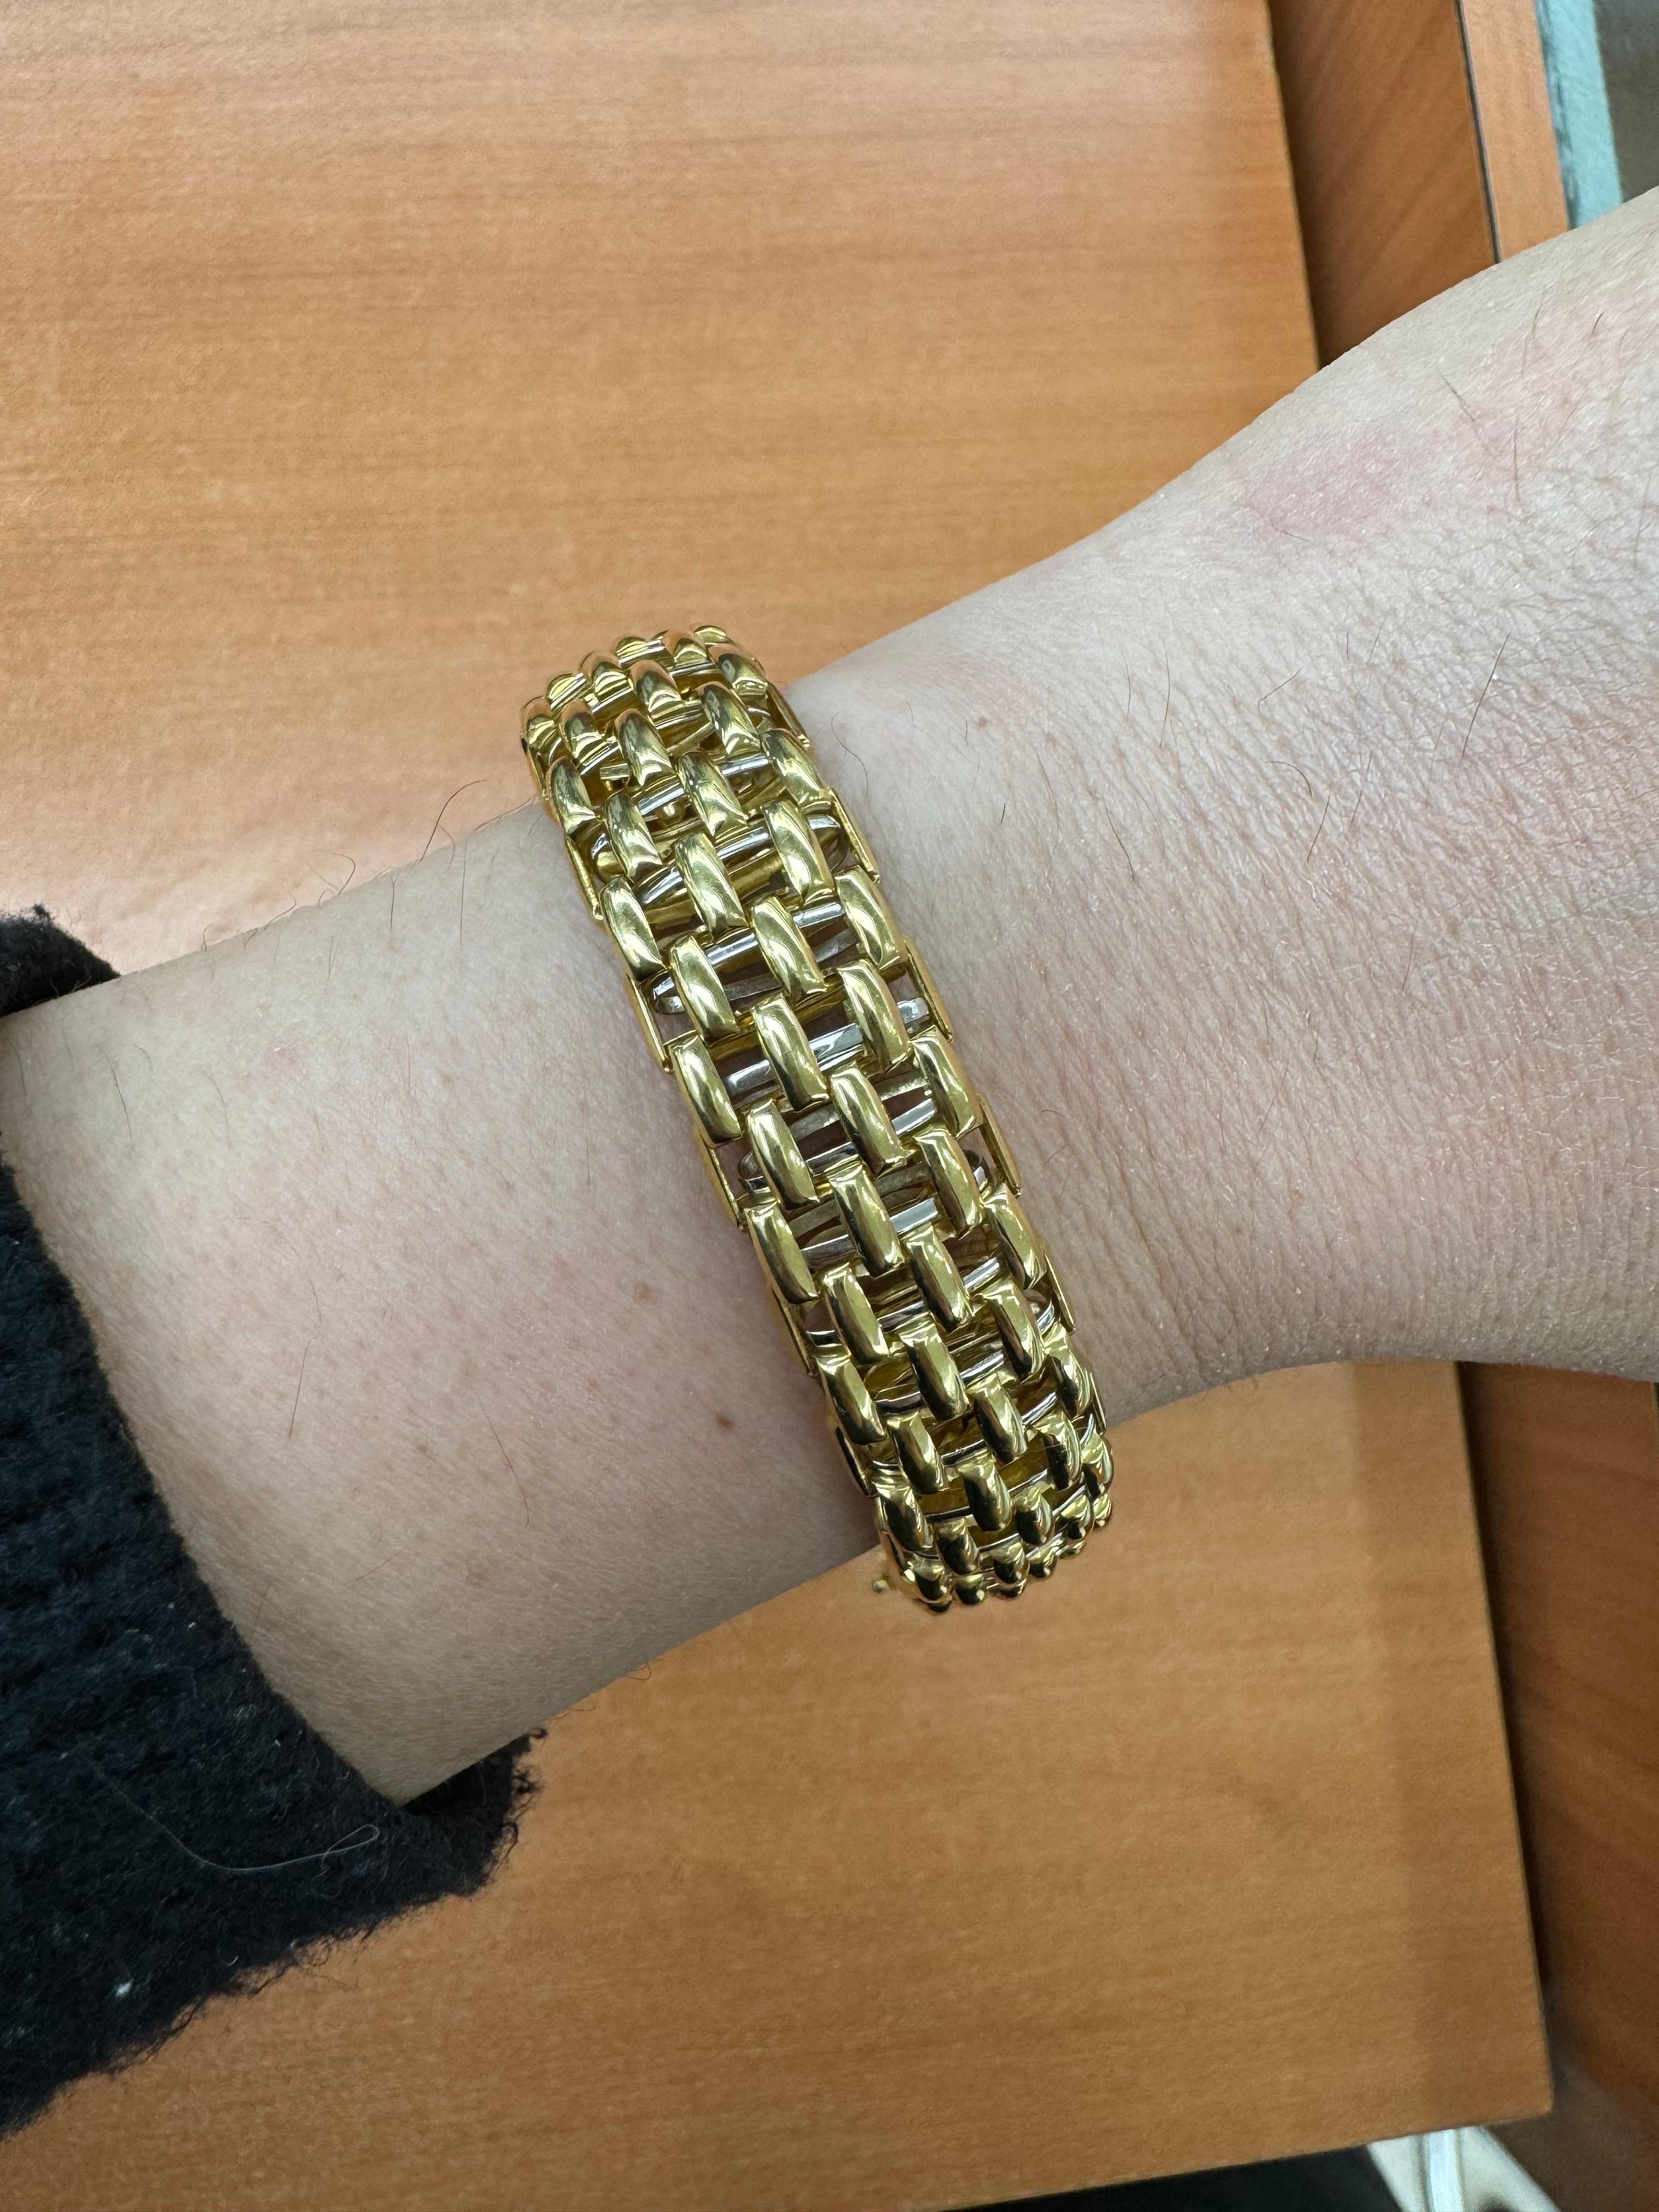 Designer Fope, this 18 karat yellow gold bracelet features a two-tone woven bracelet motif weighing 49.2 grams. 
8 inches